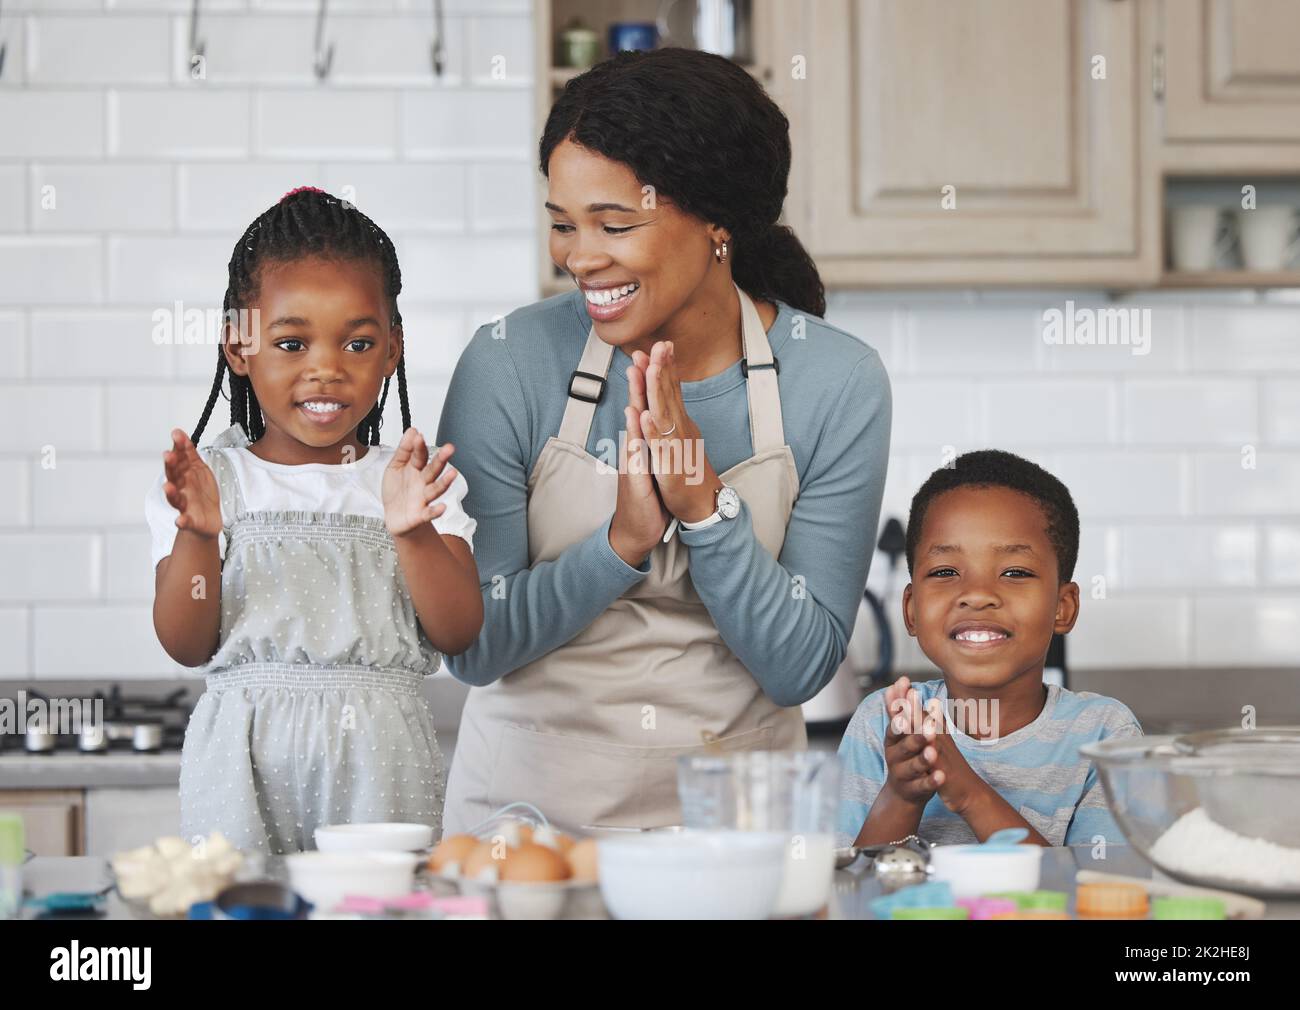 Baking is like washing, the results are equally temporary. Shot of a mother baking with her children at home. Stock Photo